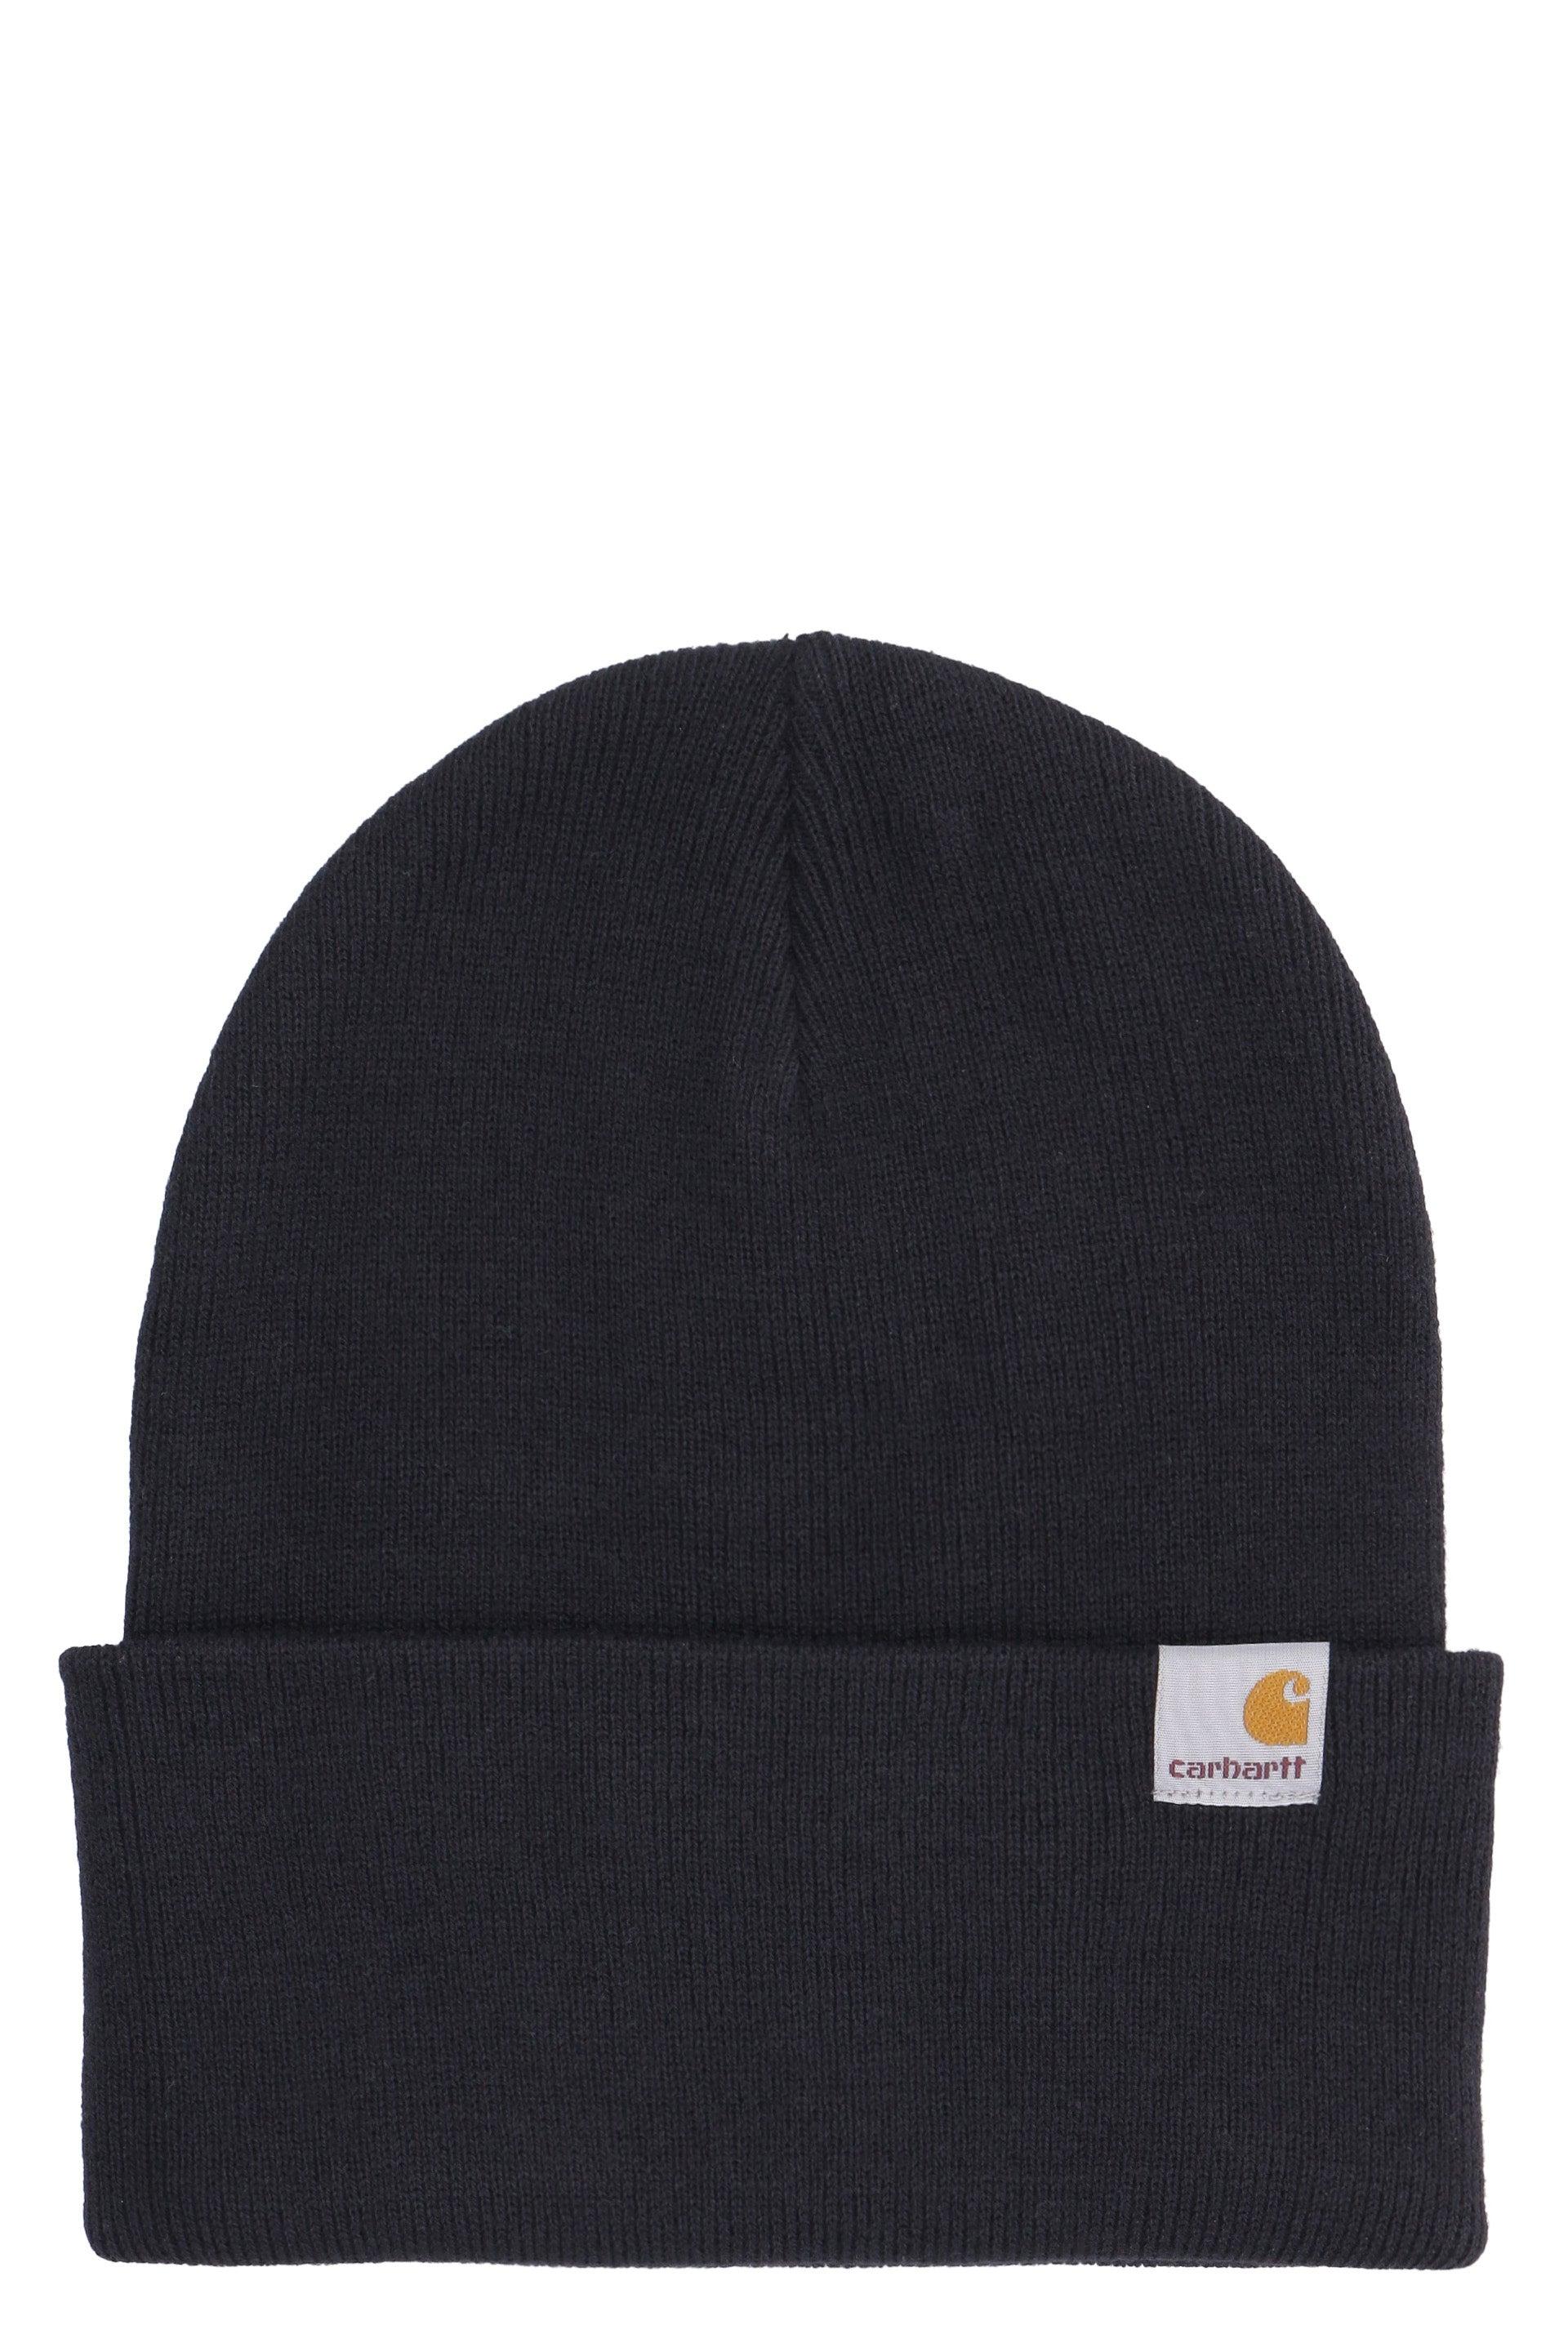 Carhartt Synthetic Ribbed Knit Beanie in Black (Blue) for Men - Save 71% |  Lyst